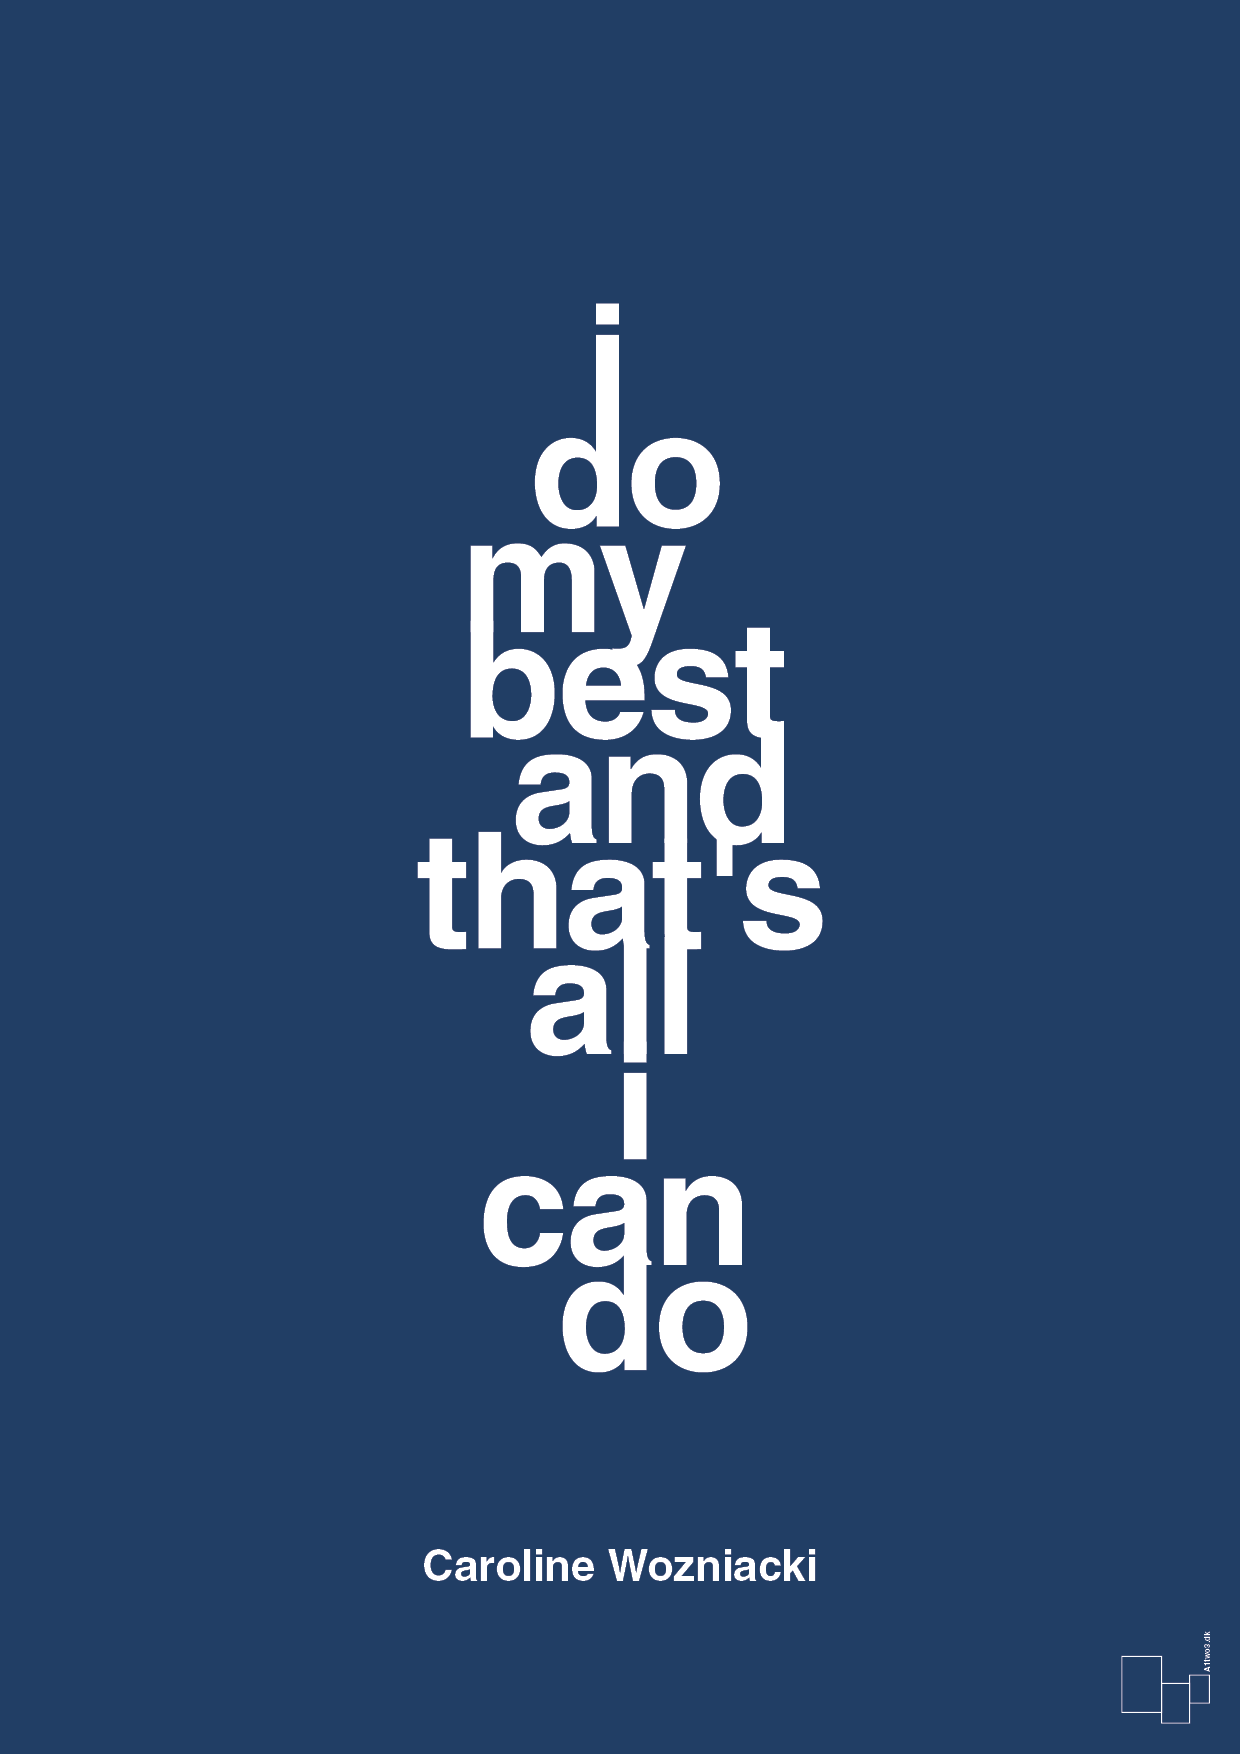 i do my best and that's all i can do - Plakat med Citater i Lapis Blue